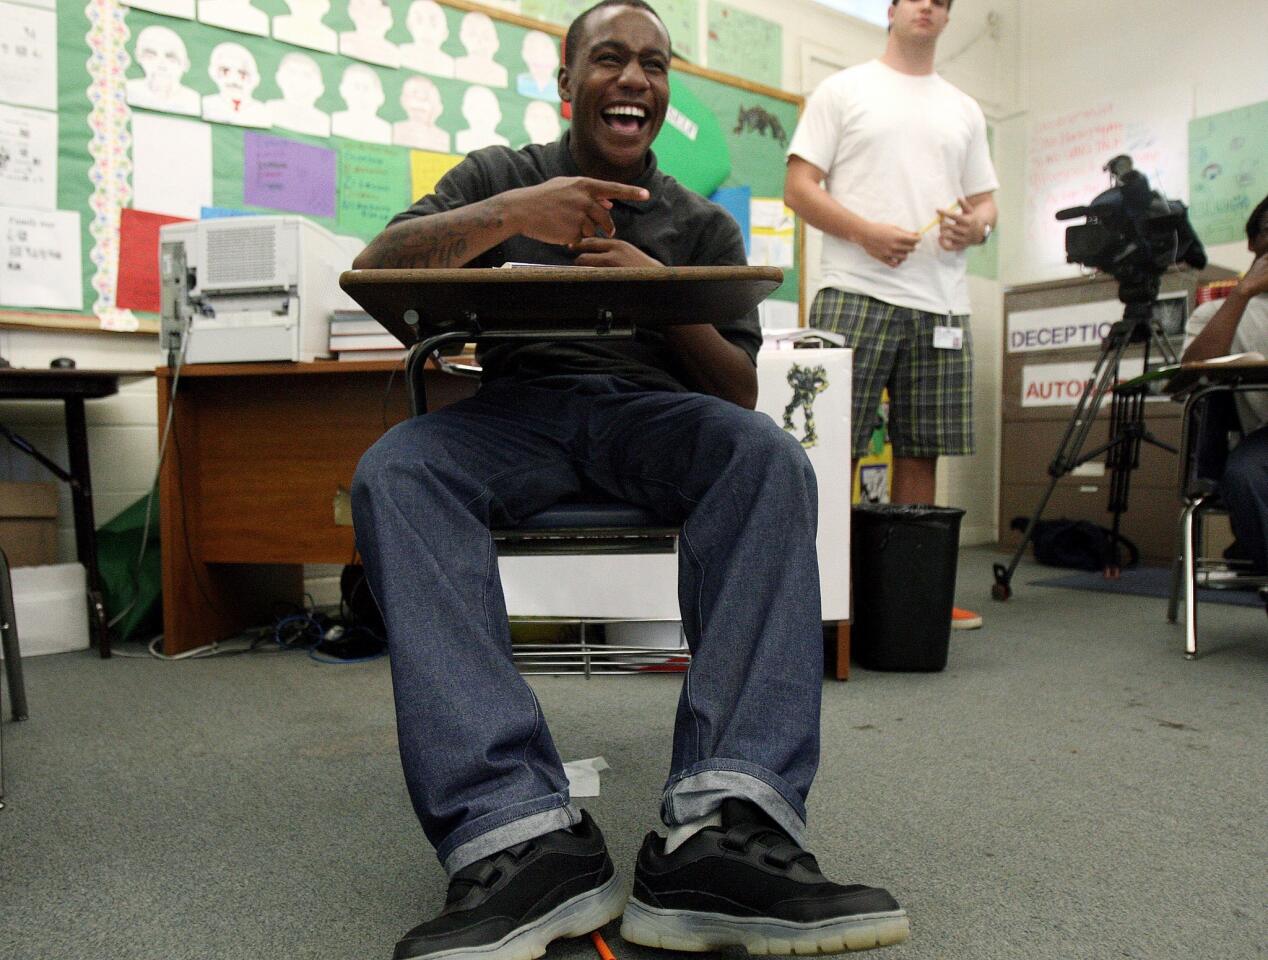 Marquis, 16, shares a light moment with other students at Camp Afflerbaugh, one of the two Los Angeles County juvenile probation camps to participate in the Freedom School program. The Times received permission from Los Angeles County juvenile court to use the images of the young men, as well as their first names.